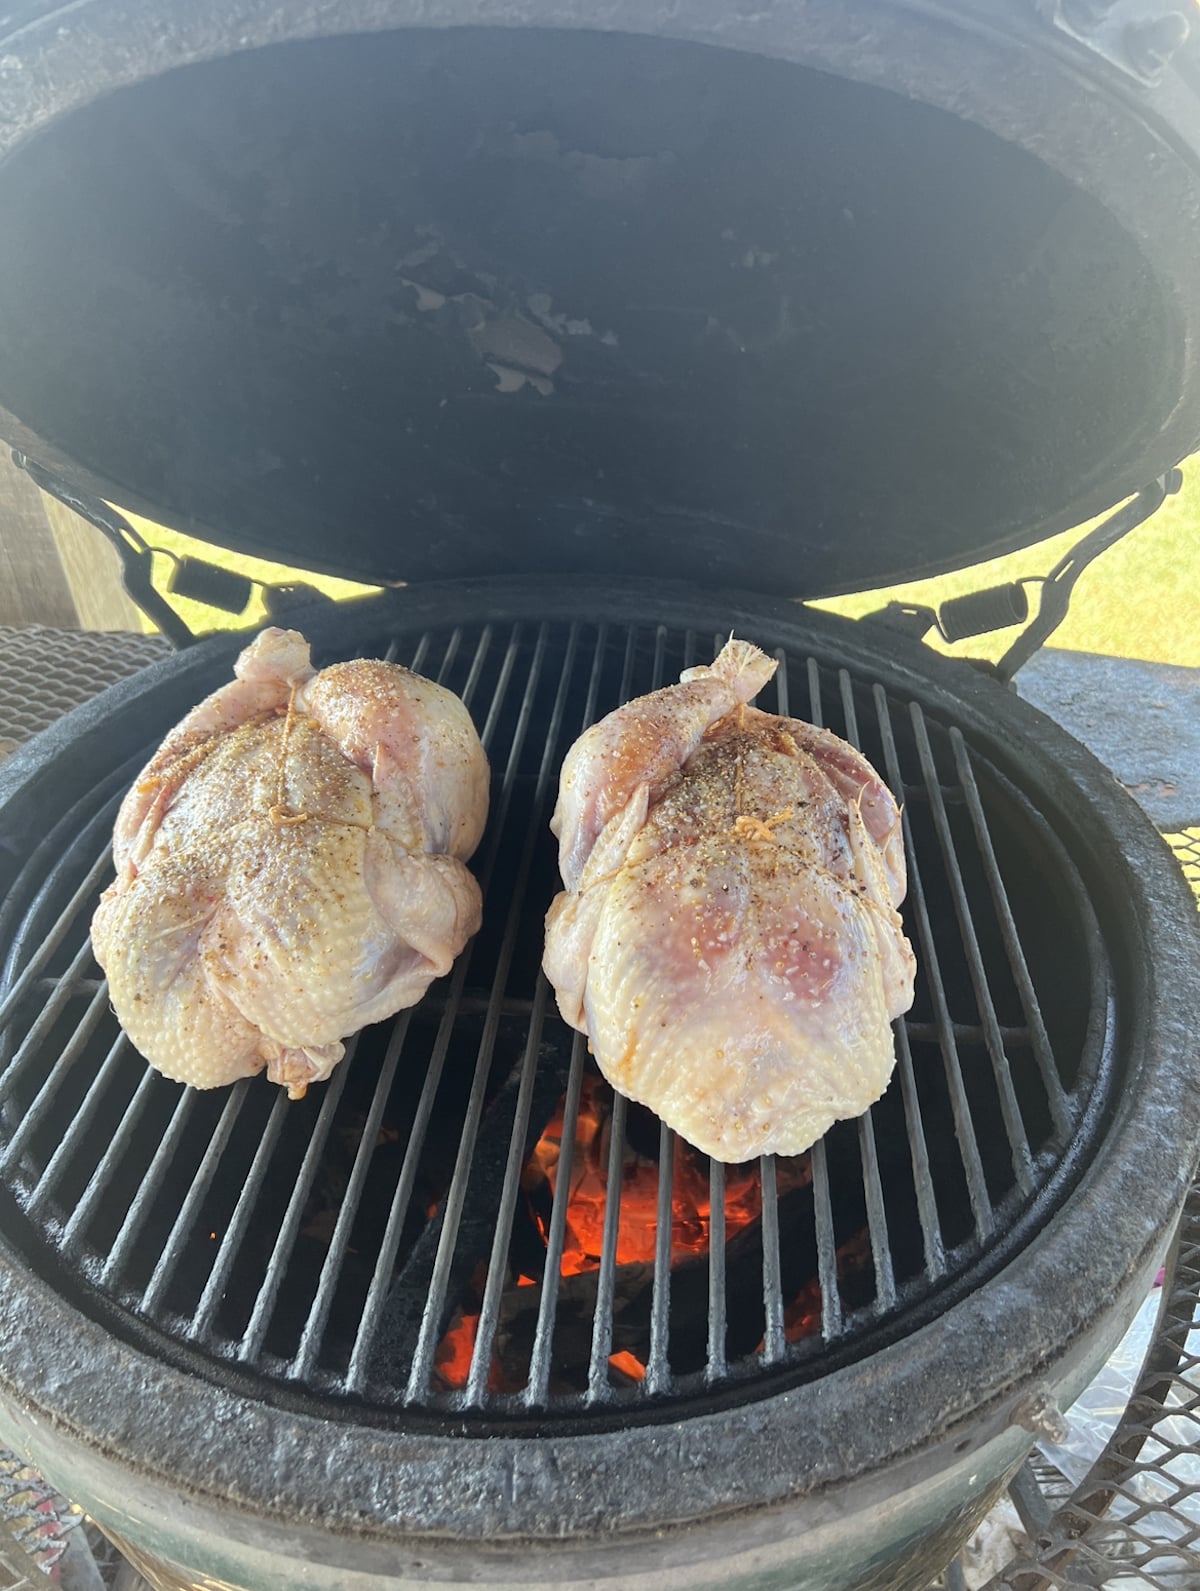 2 whole chickens on a grill.